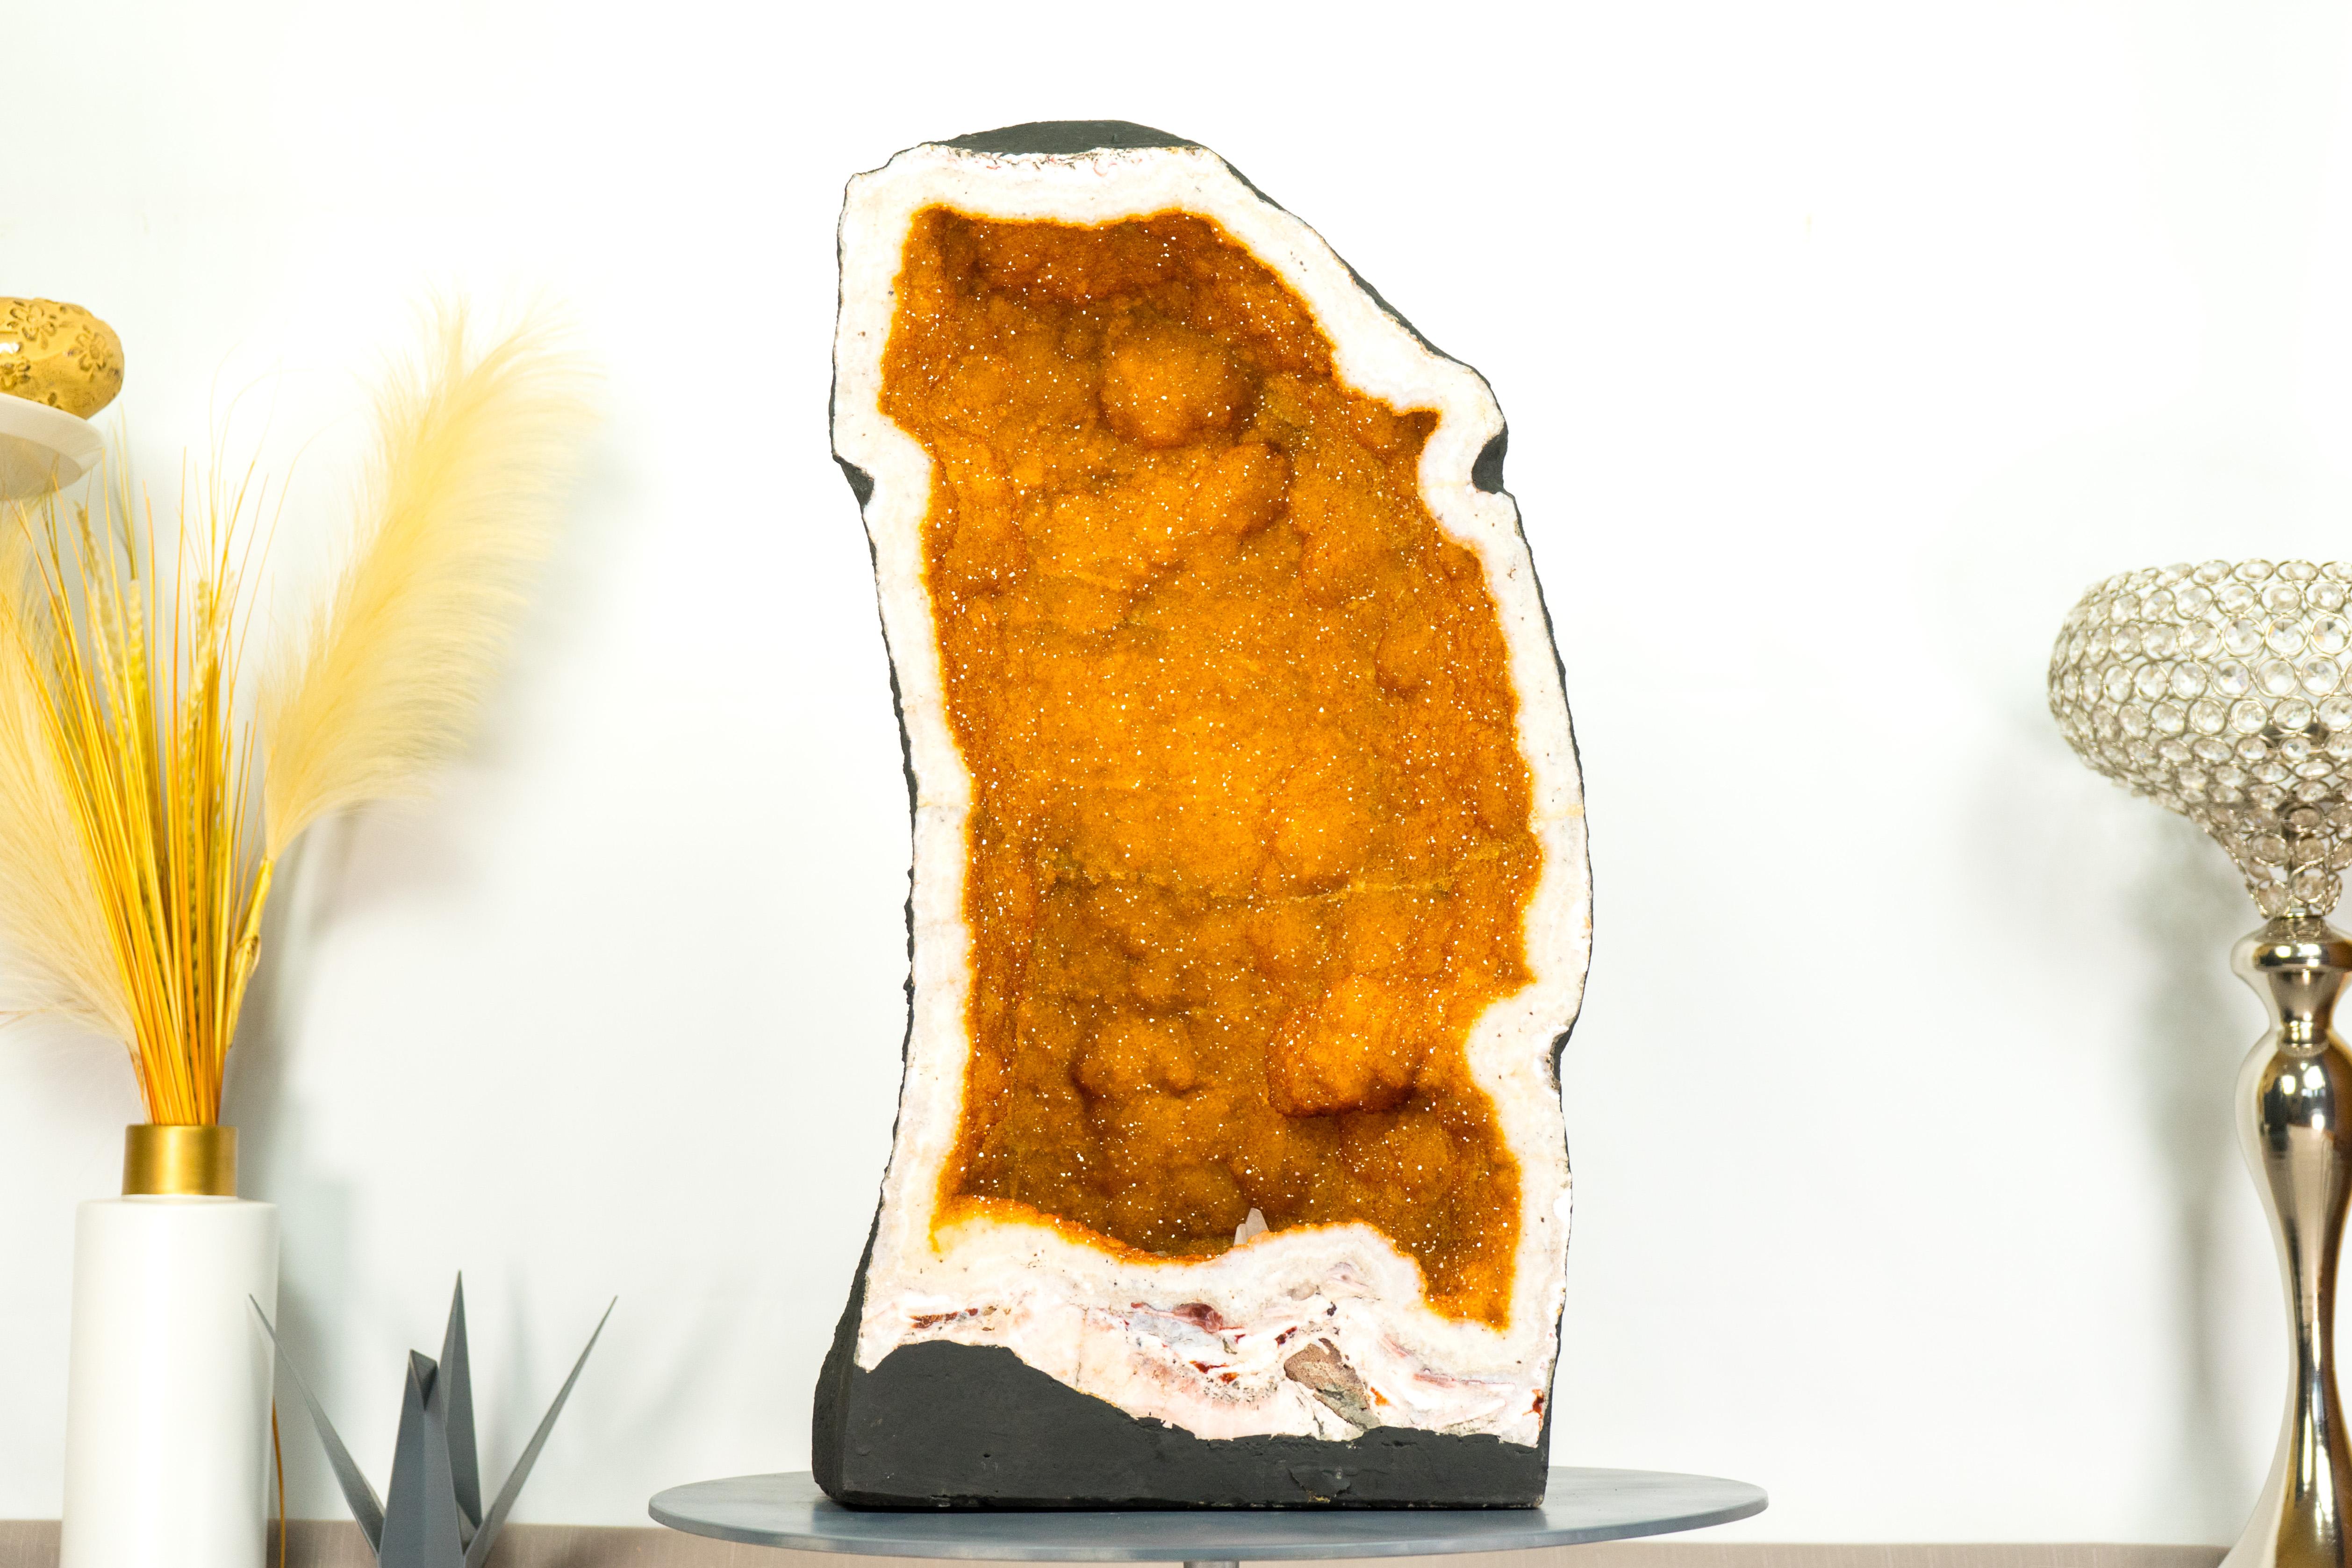 A truly unique and stunning geode, this golden yellow Citrine geode brings together rare characteristics with beautiful aesthetics. It is a geode that will certainly become a statement piece in your collection or a natural artwork to add to your